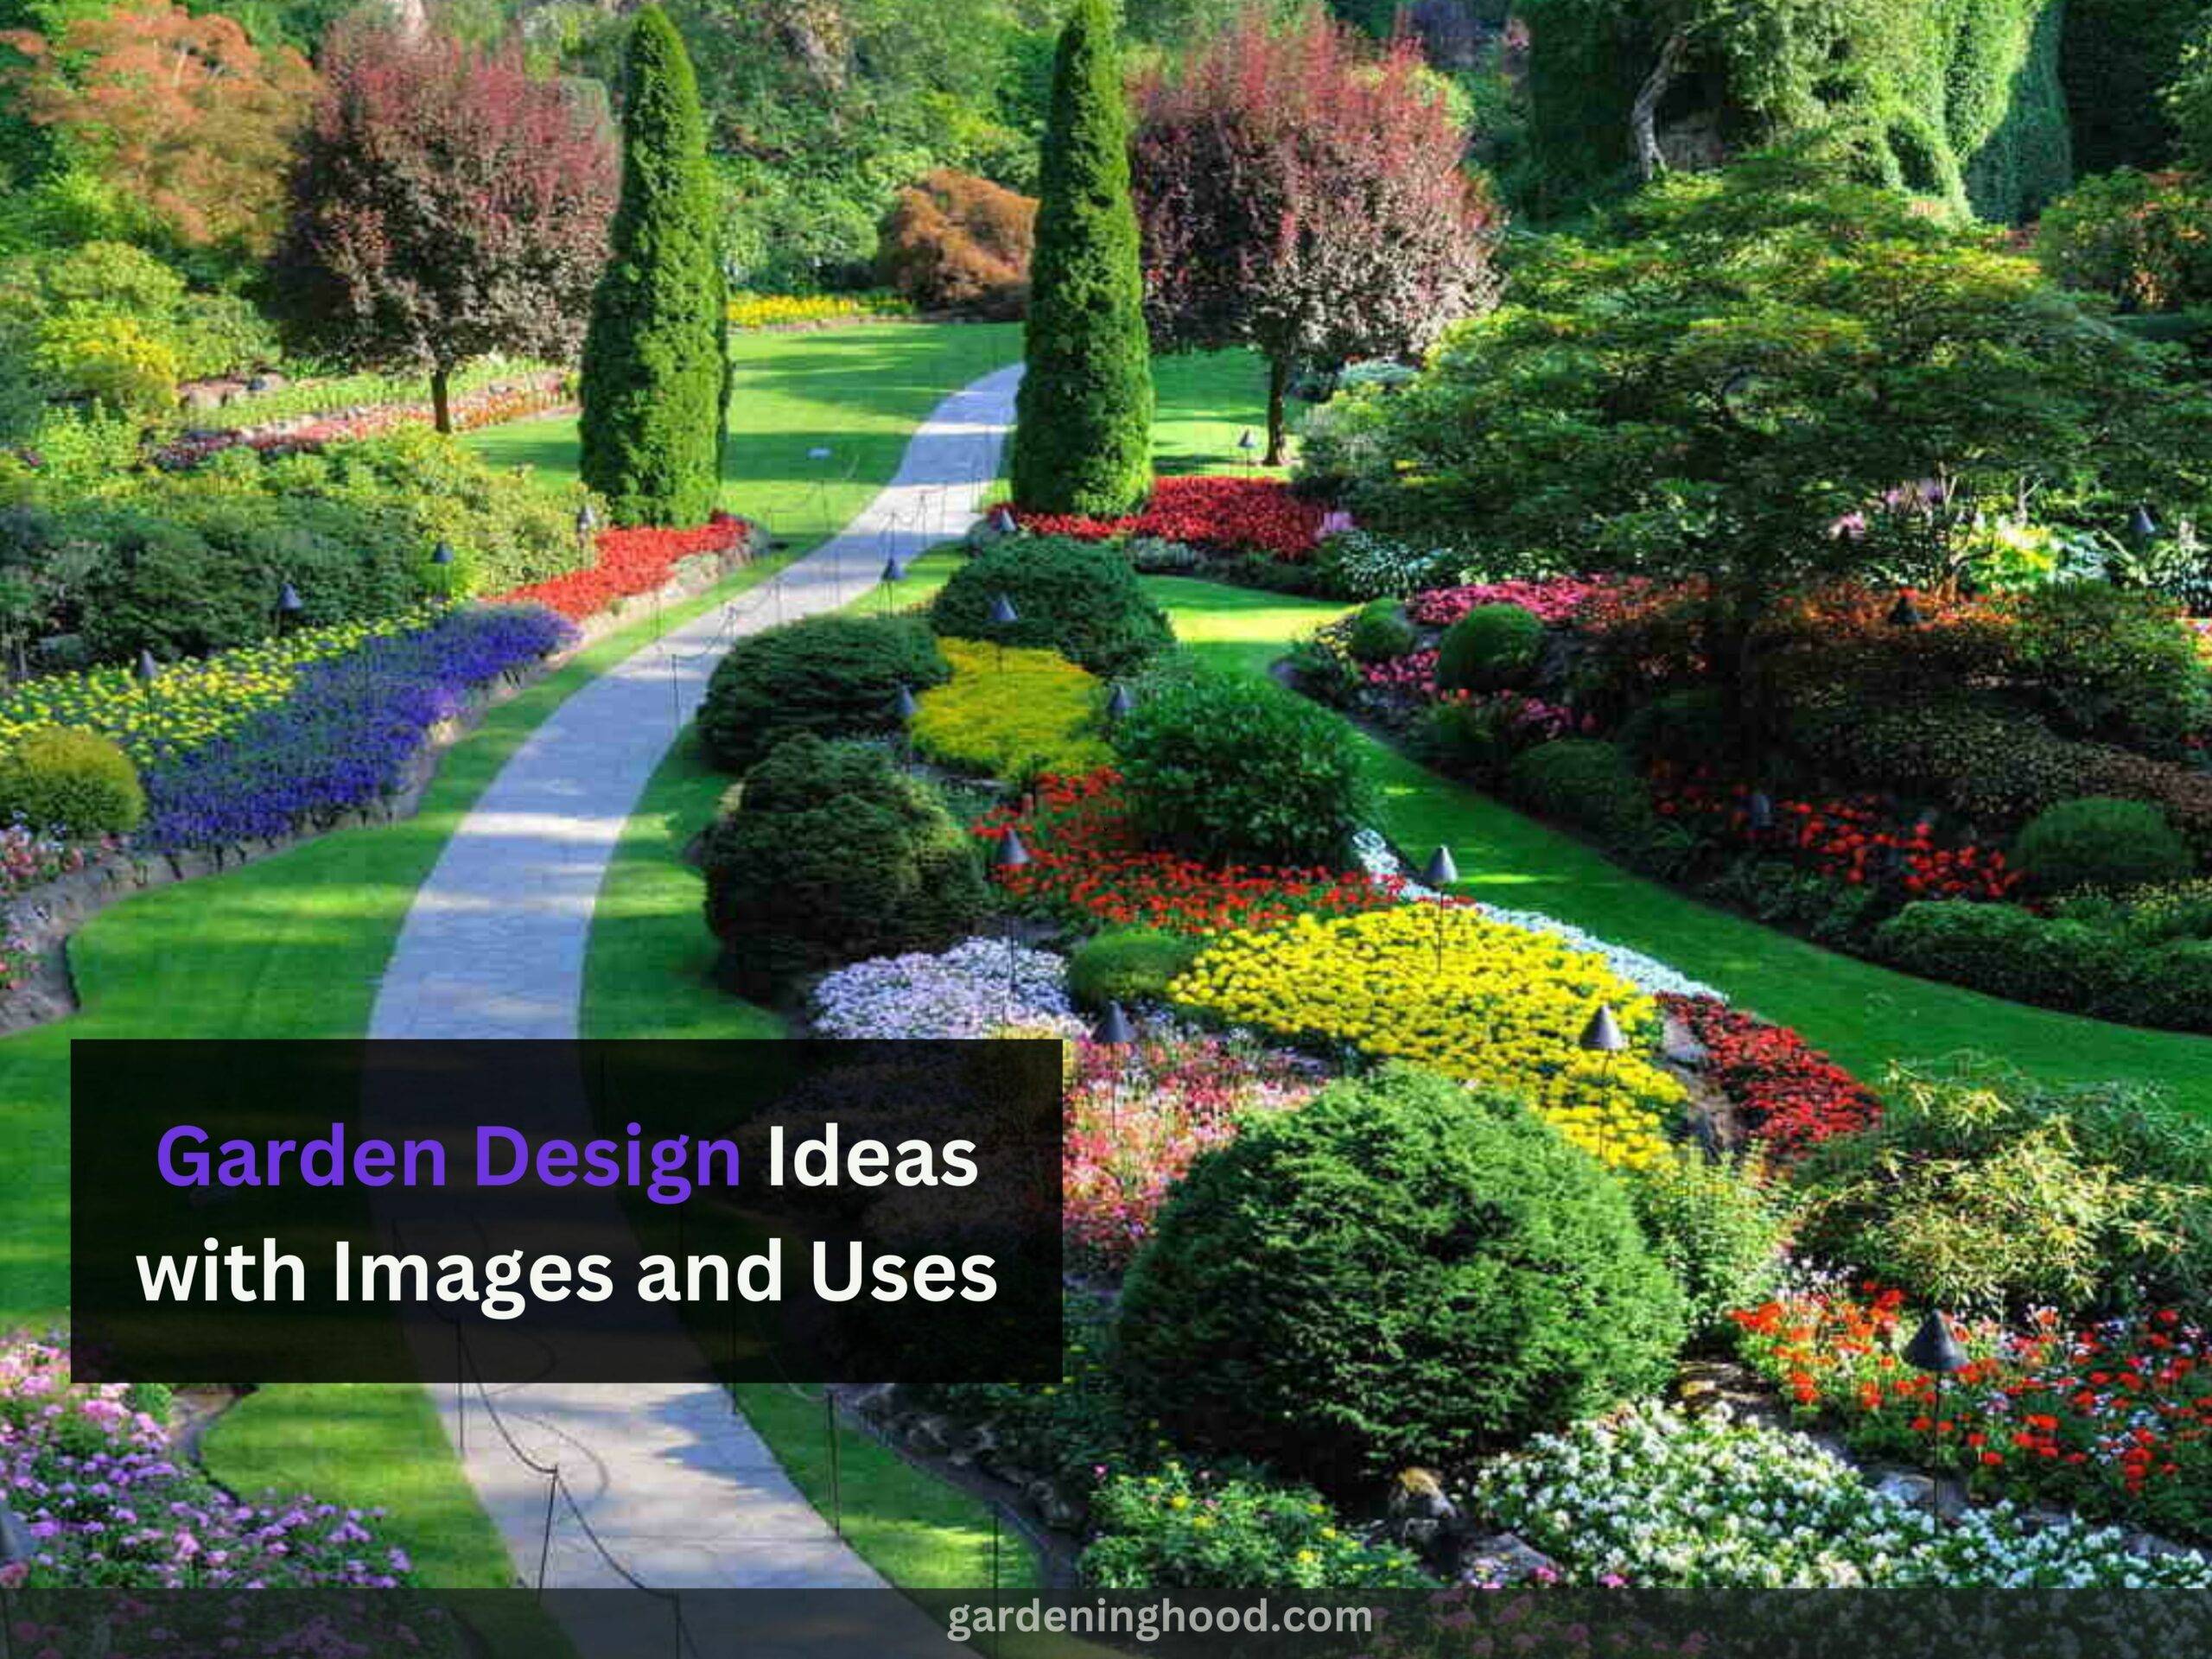 Garden Design Ideas with Images and Uses